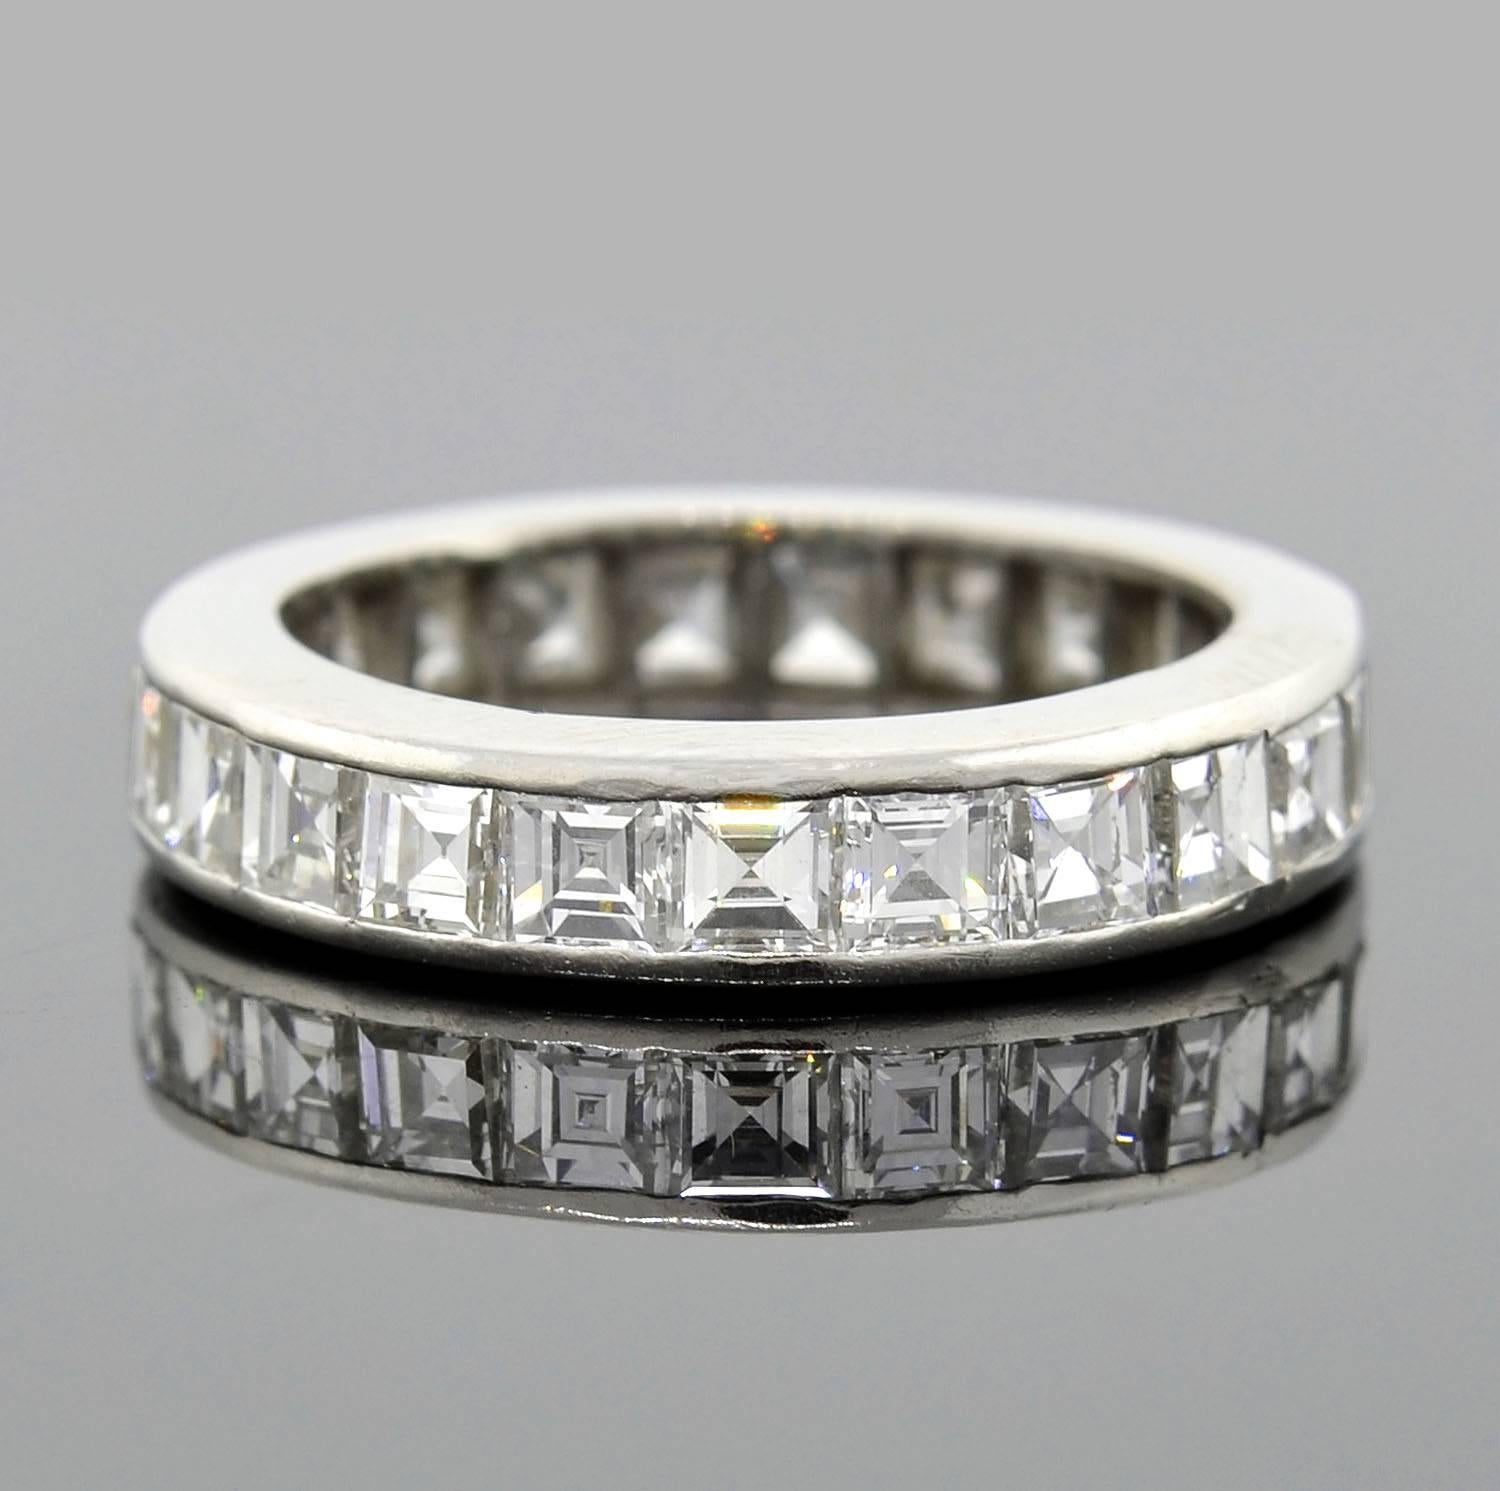 A stunning diamond eternity band from the Retro (ca1940) era! This gorgeous ring is made of platinum and holds a continuous row of sparkling square cut diamonds in a channel setting. The diamonds carry seamlessly around the entire surface of the